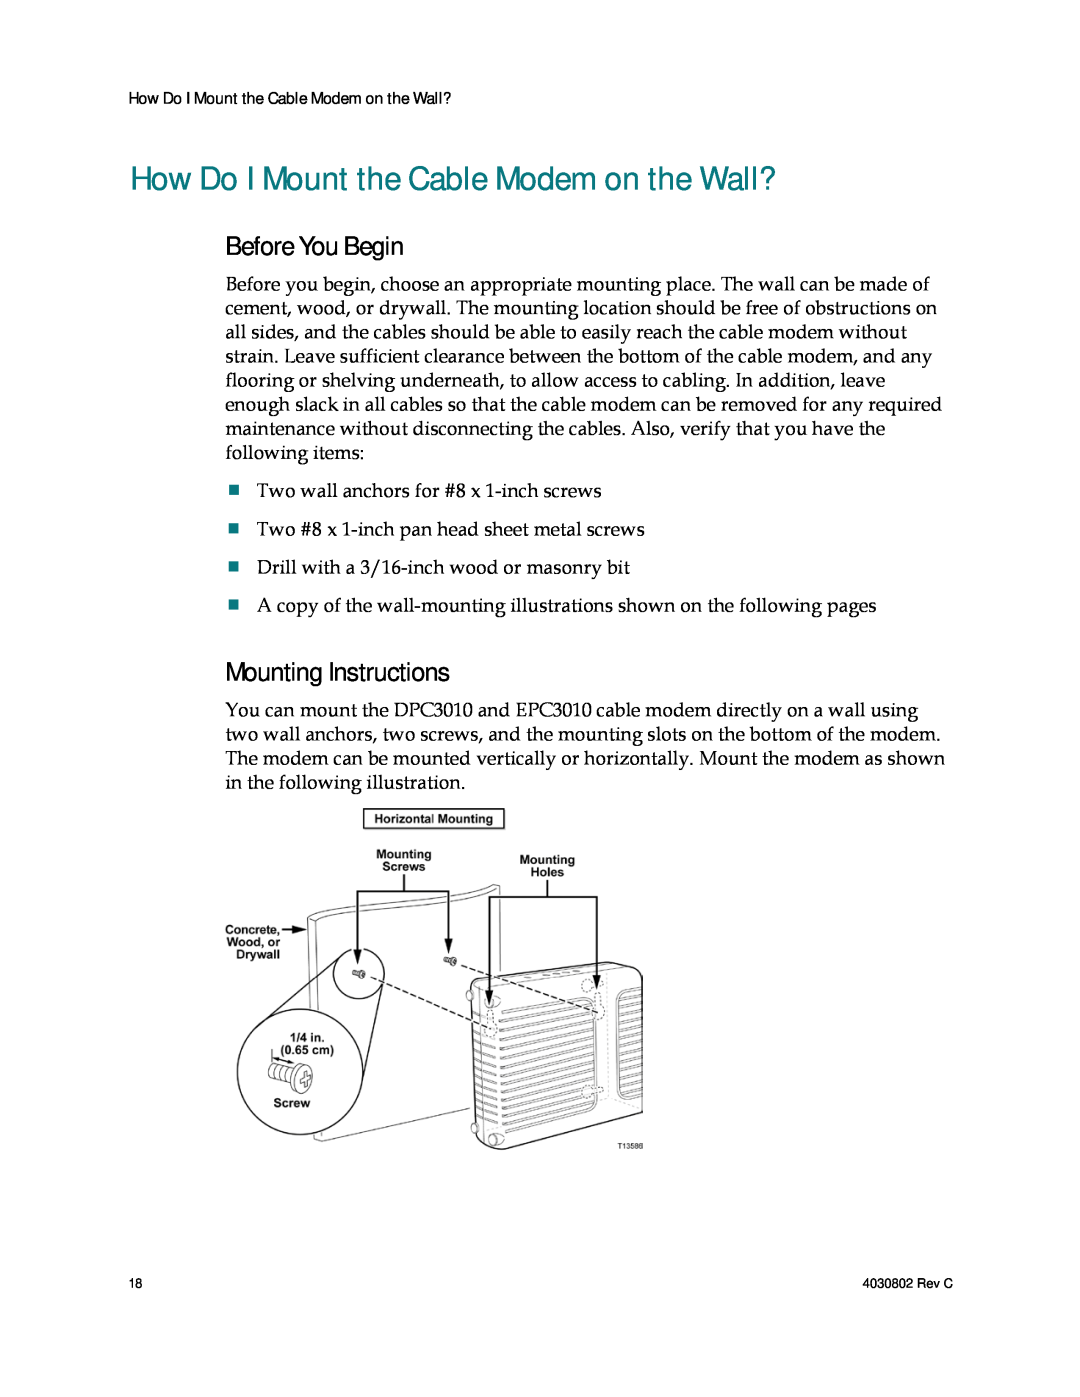 Cisco Systems 4027668 How Do I Mount the Cable Modem on the Wall?, Before You Begin, Mounting Instructions 